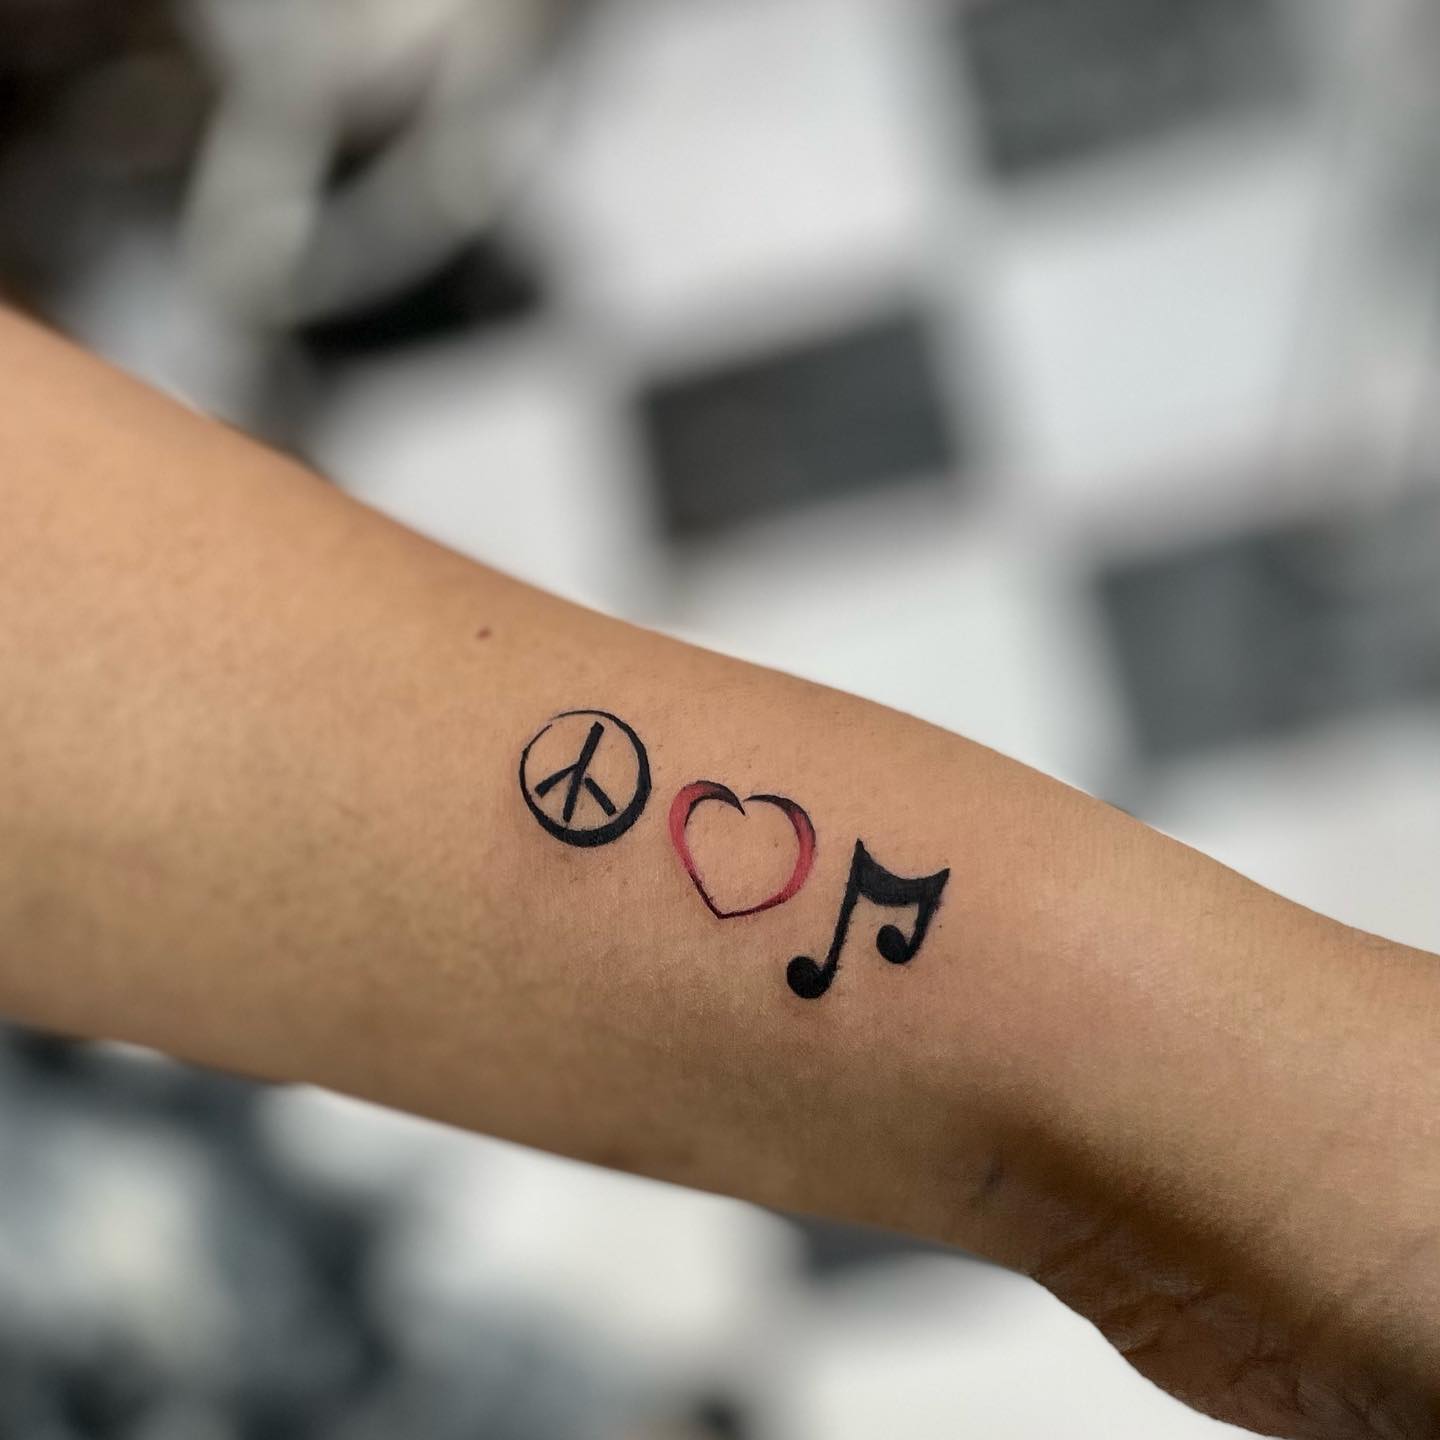 100 Cool Music Tattoo Design Ideas for Men and Women